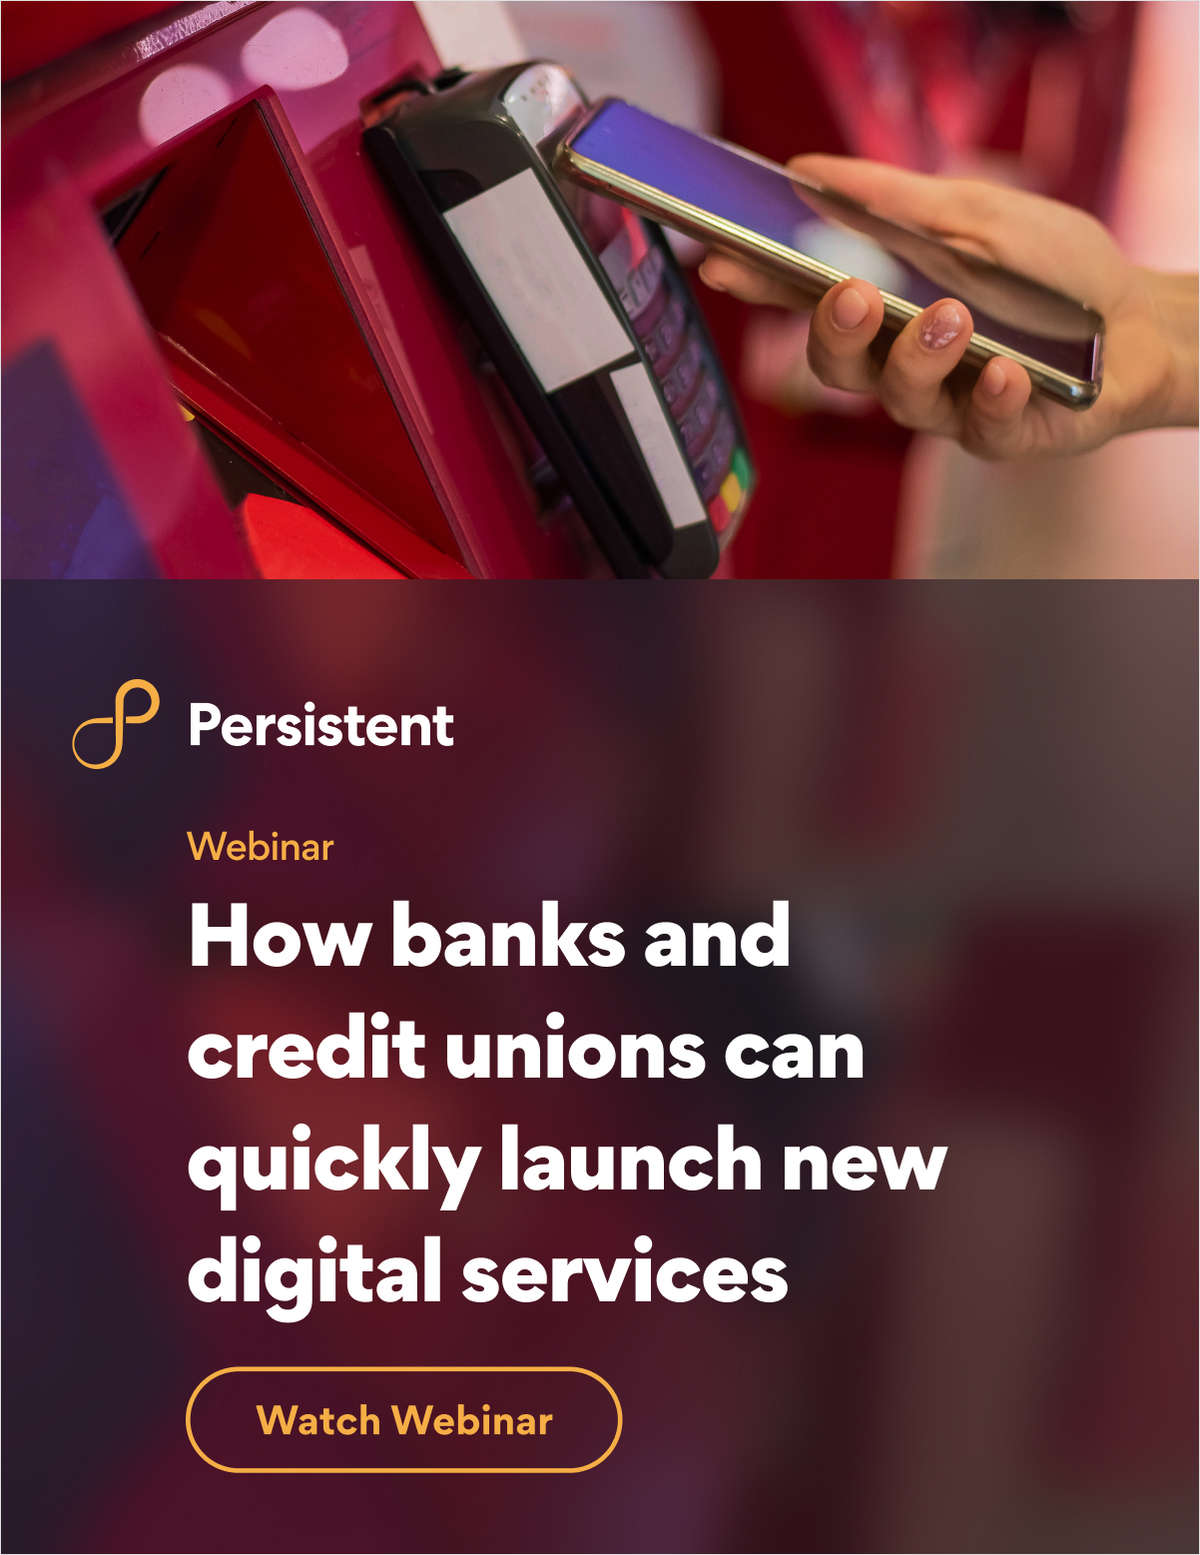 Webinar-How banks and credit unions can quickly launch new digital services